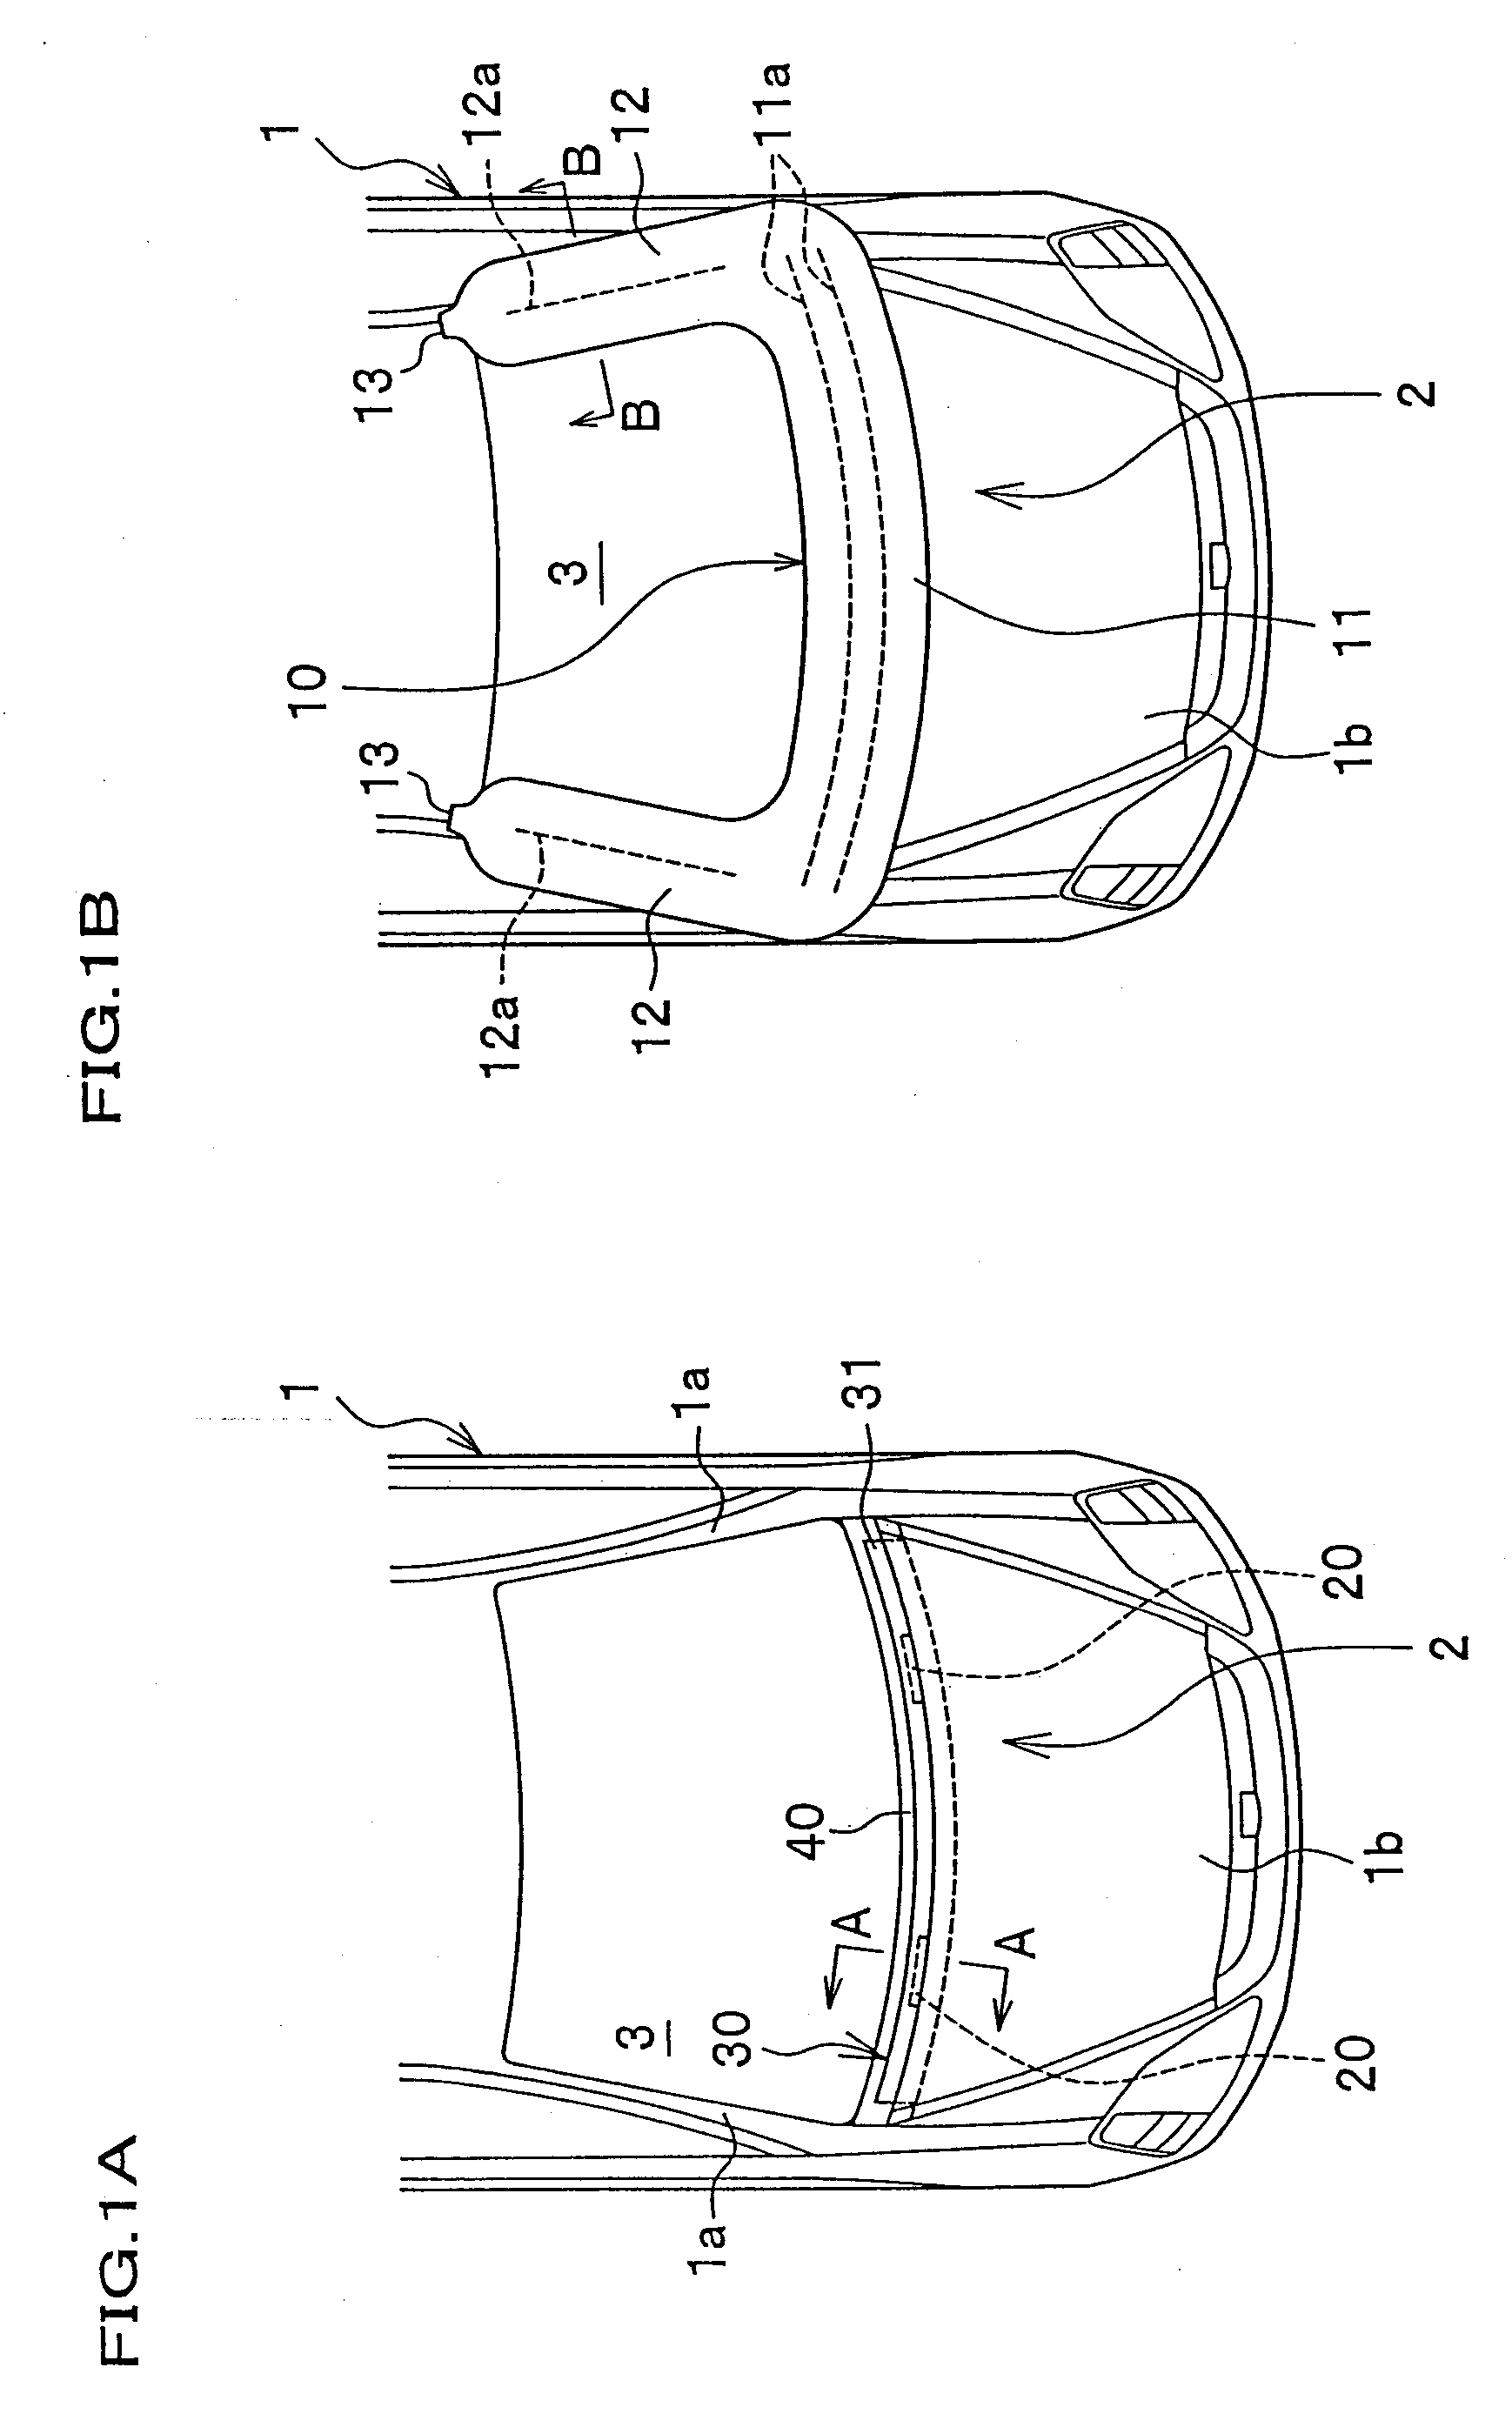 Vehicle with collision object protection device